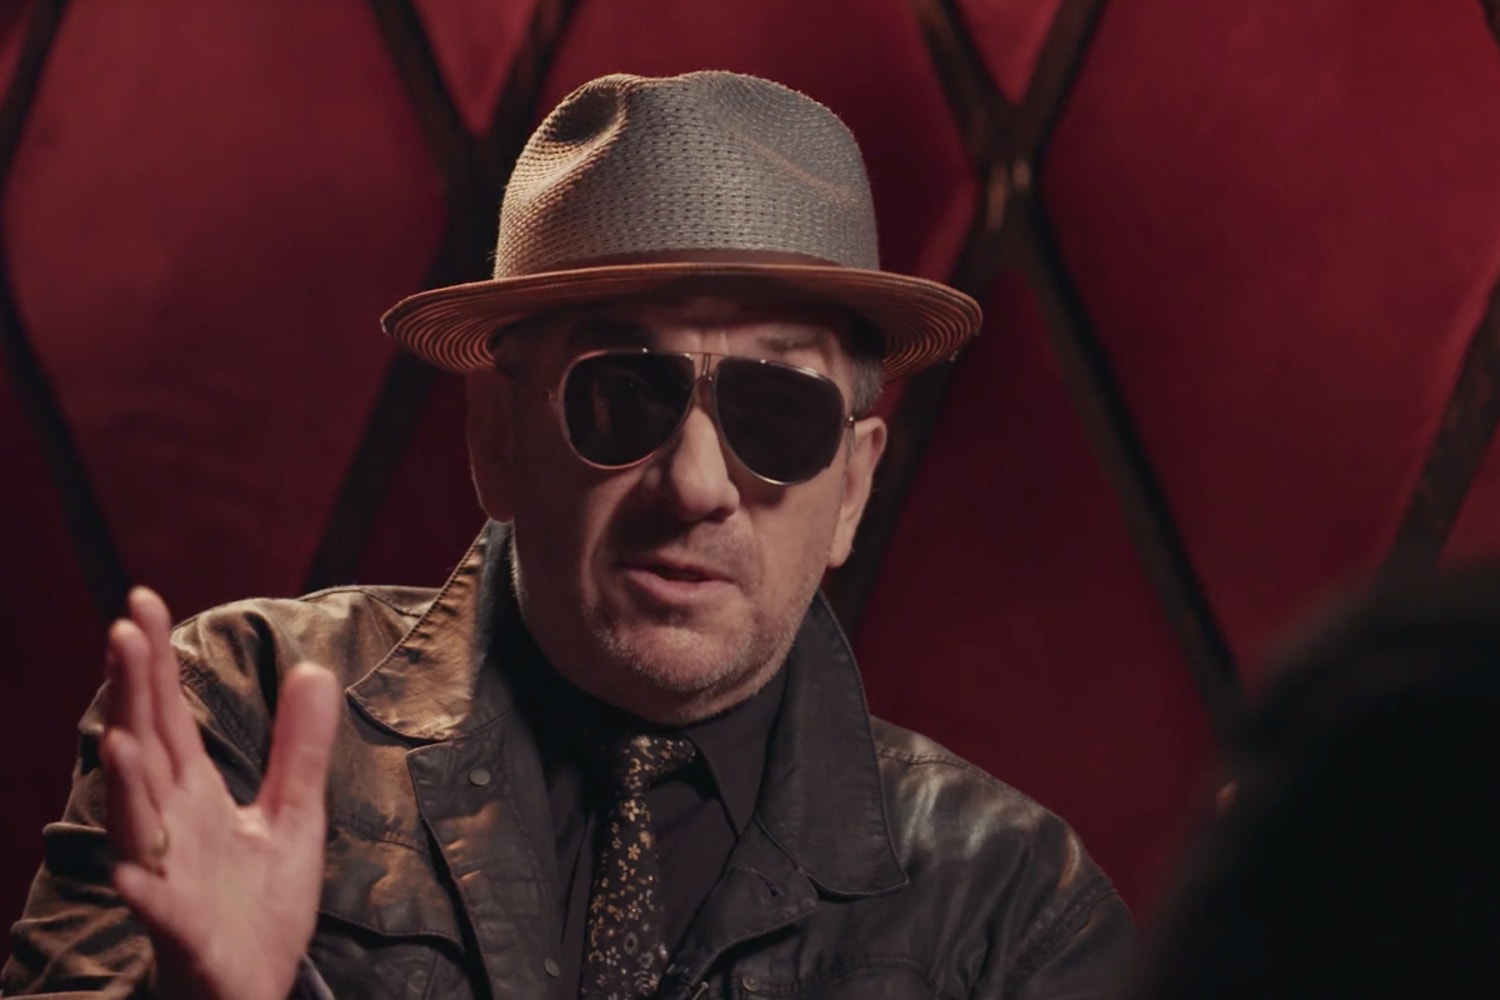 Elvis Costello on His New Album, Mortality and His Musical Evolution